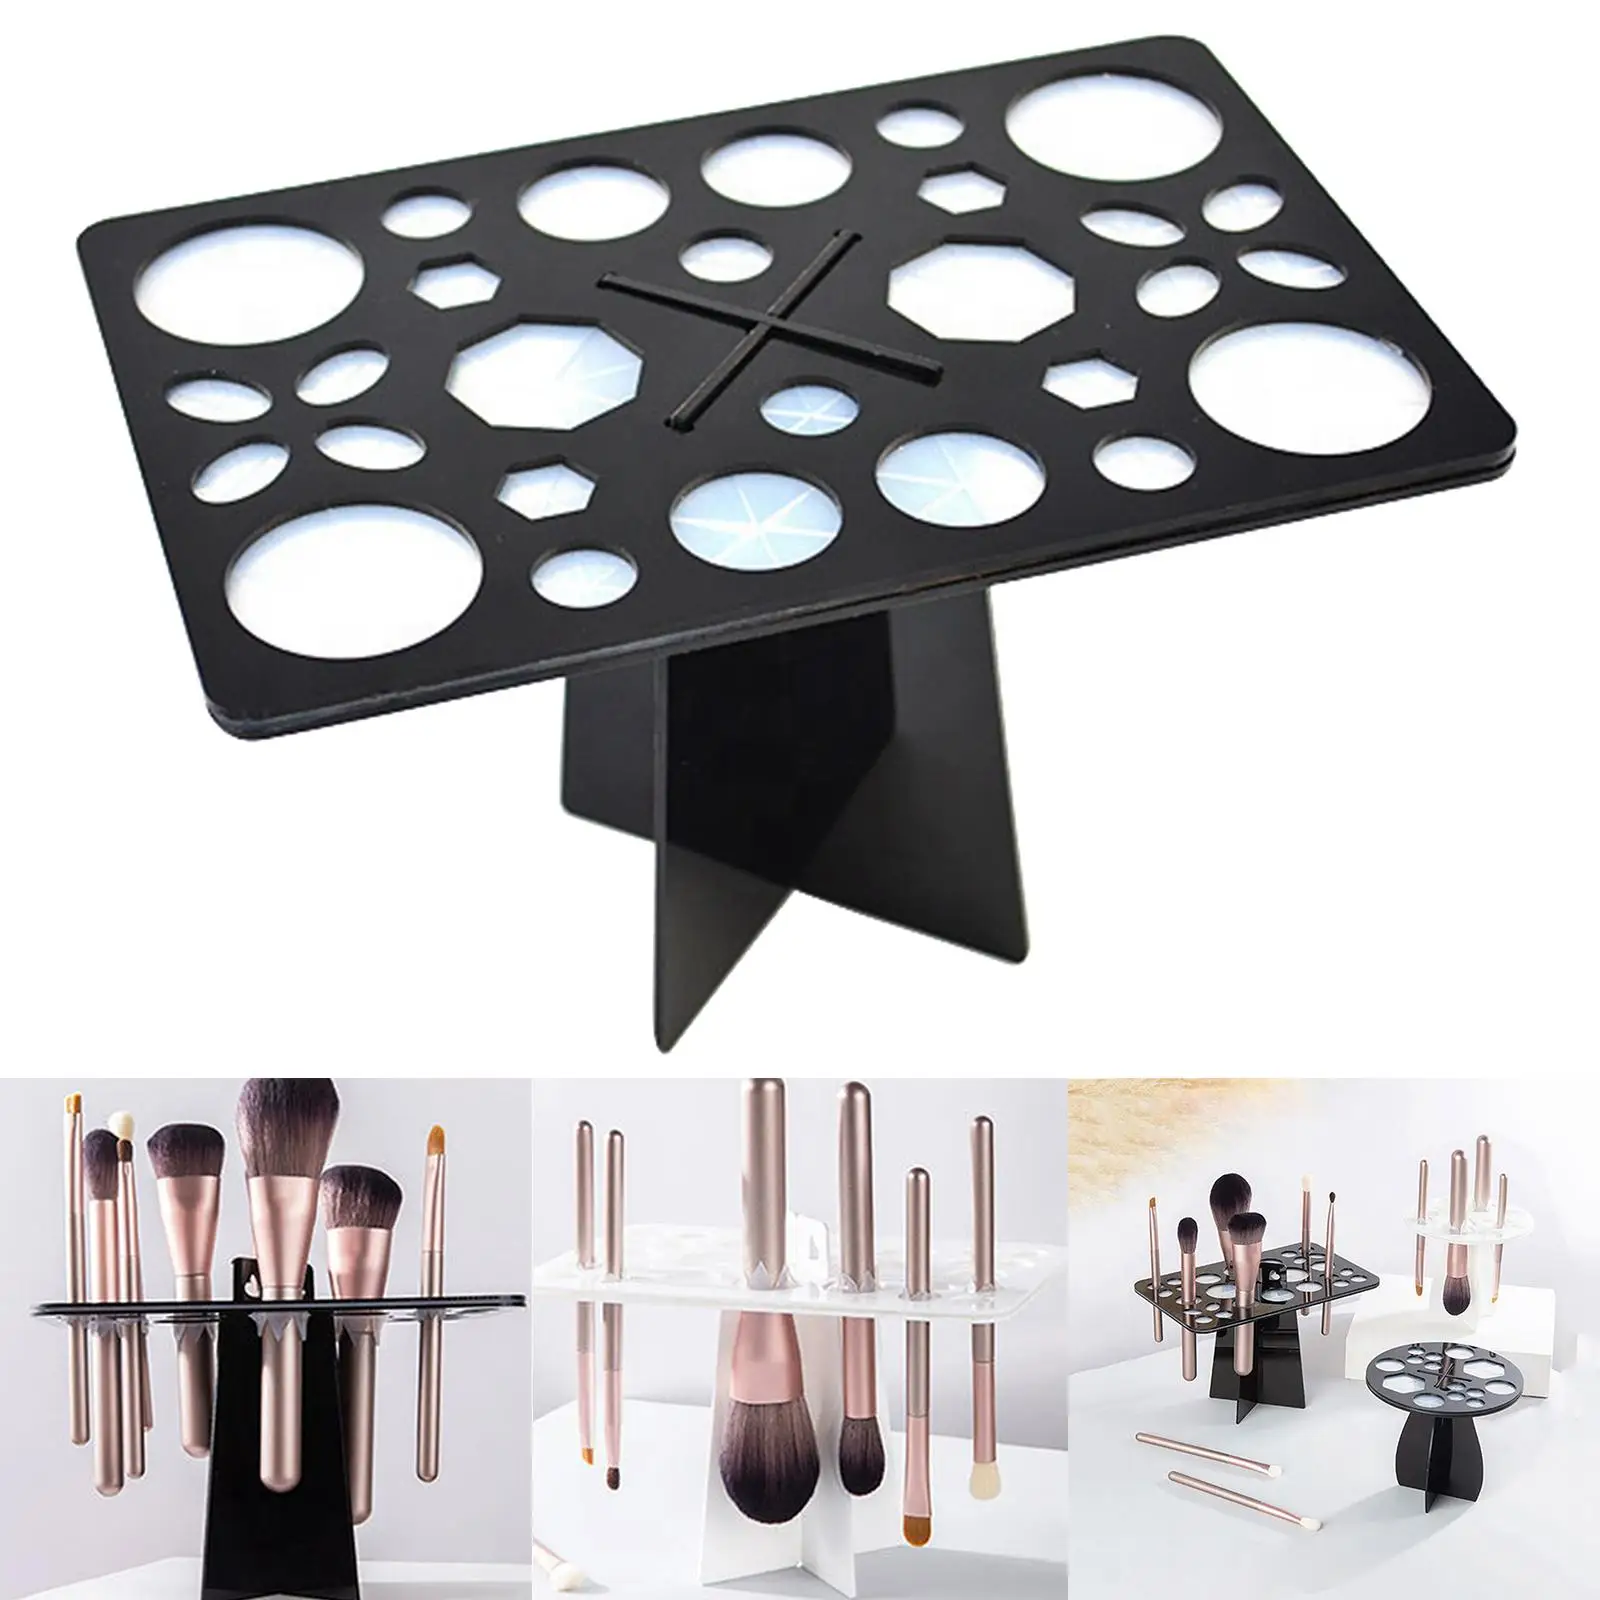 Nail Brushes Stand Dryer Removable Durable Waterproof Paintbrushes Holder